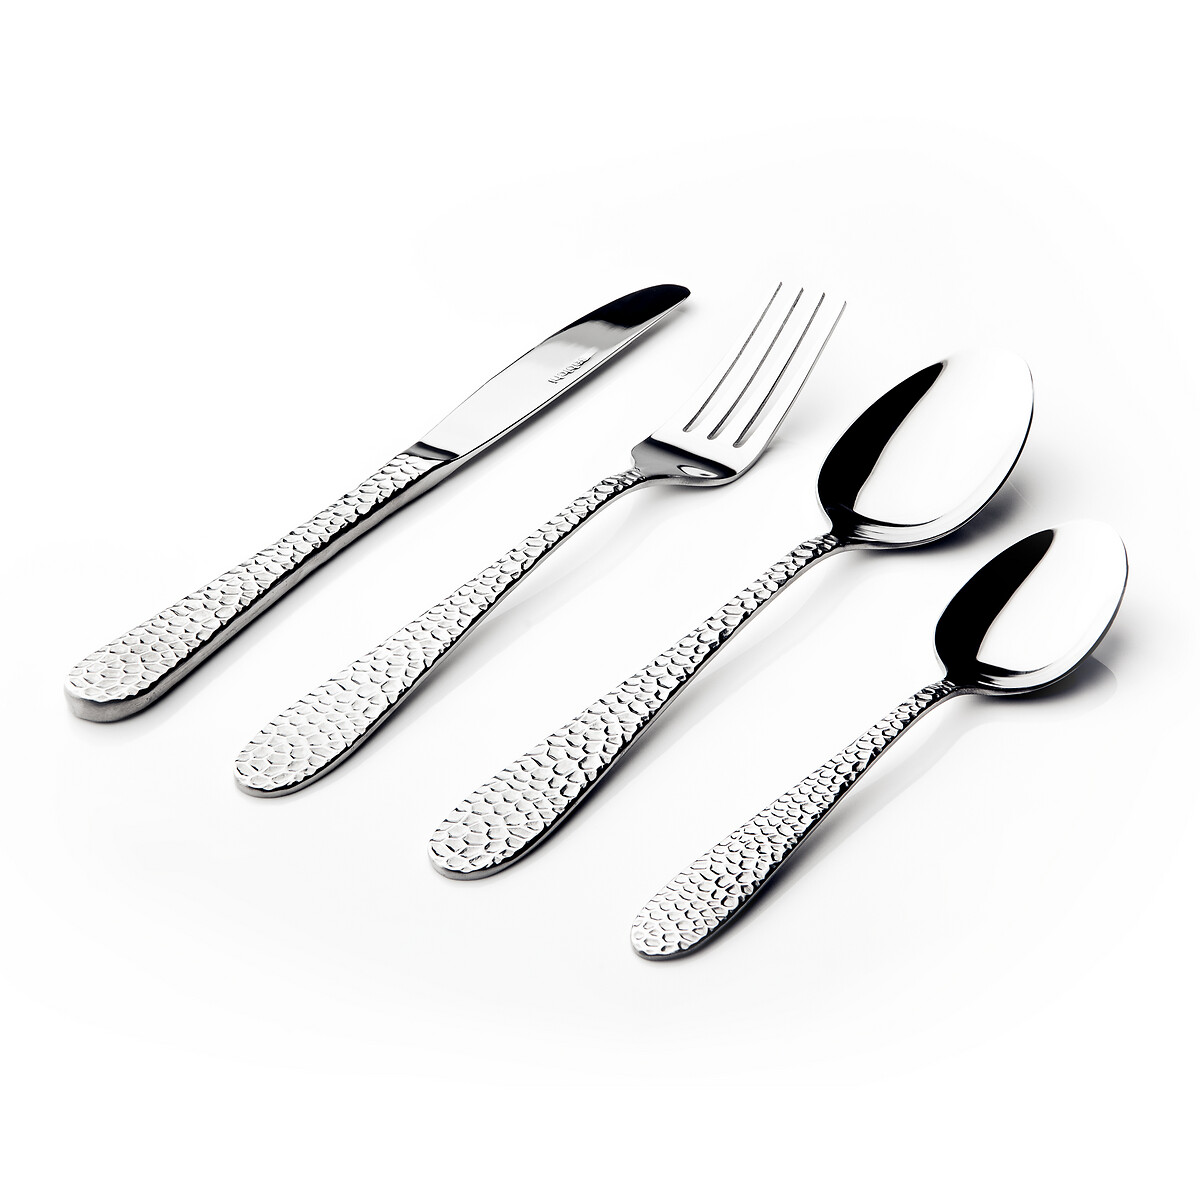 16 Piece Hammered Stainless Steel Cutlery Set